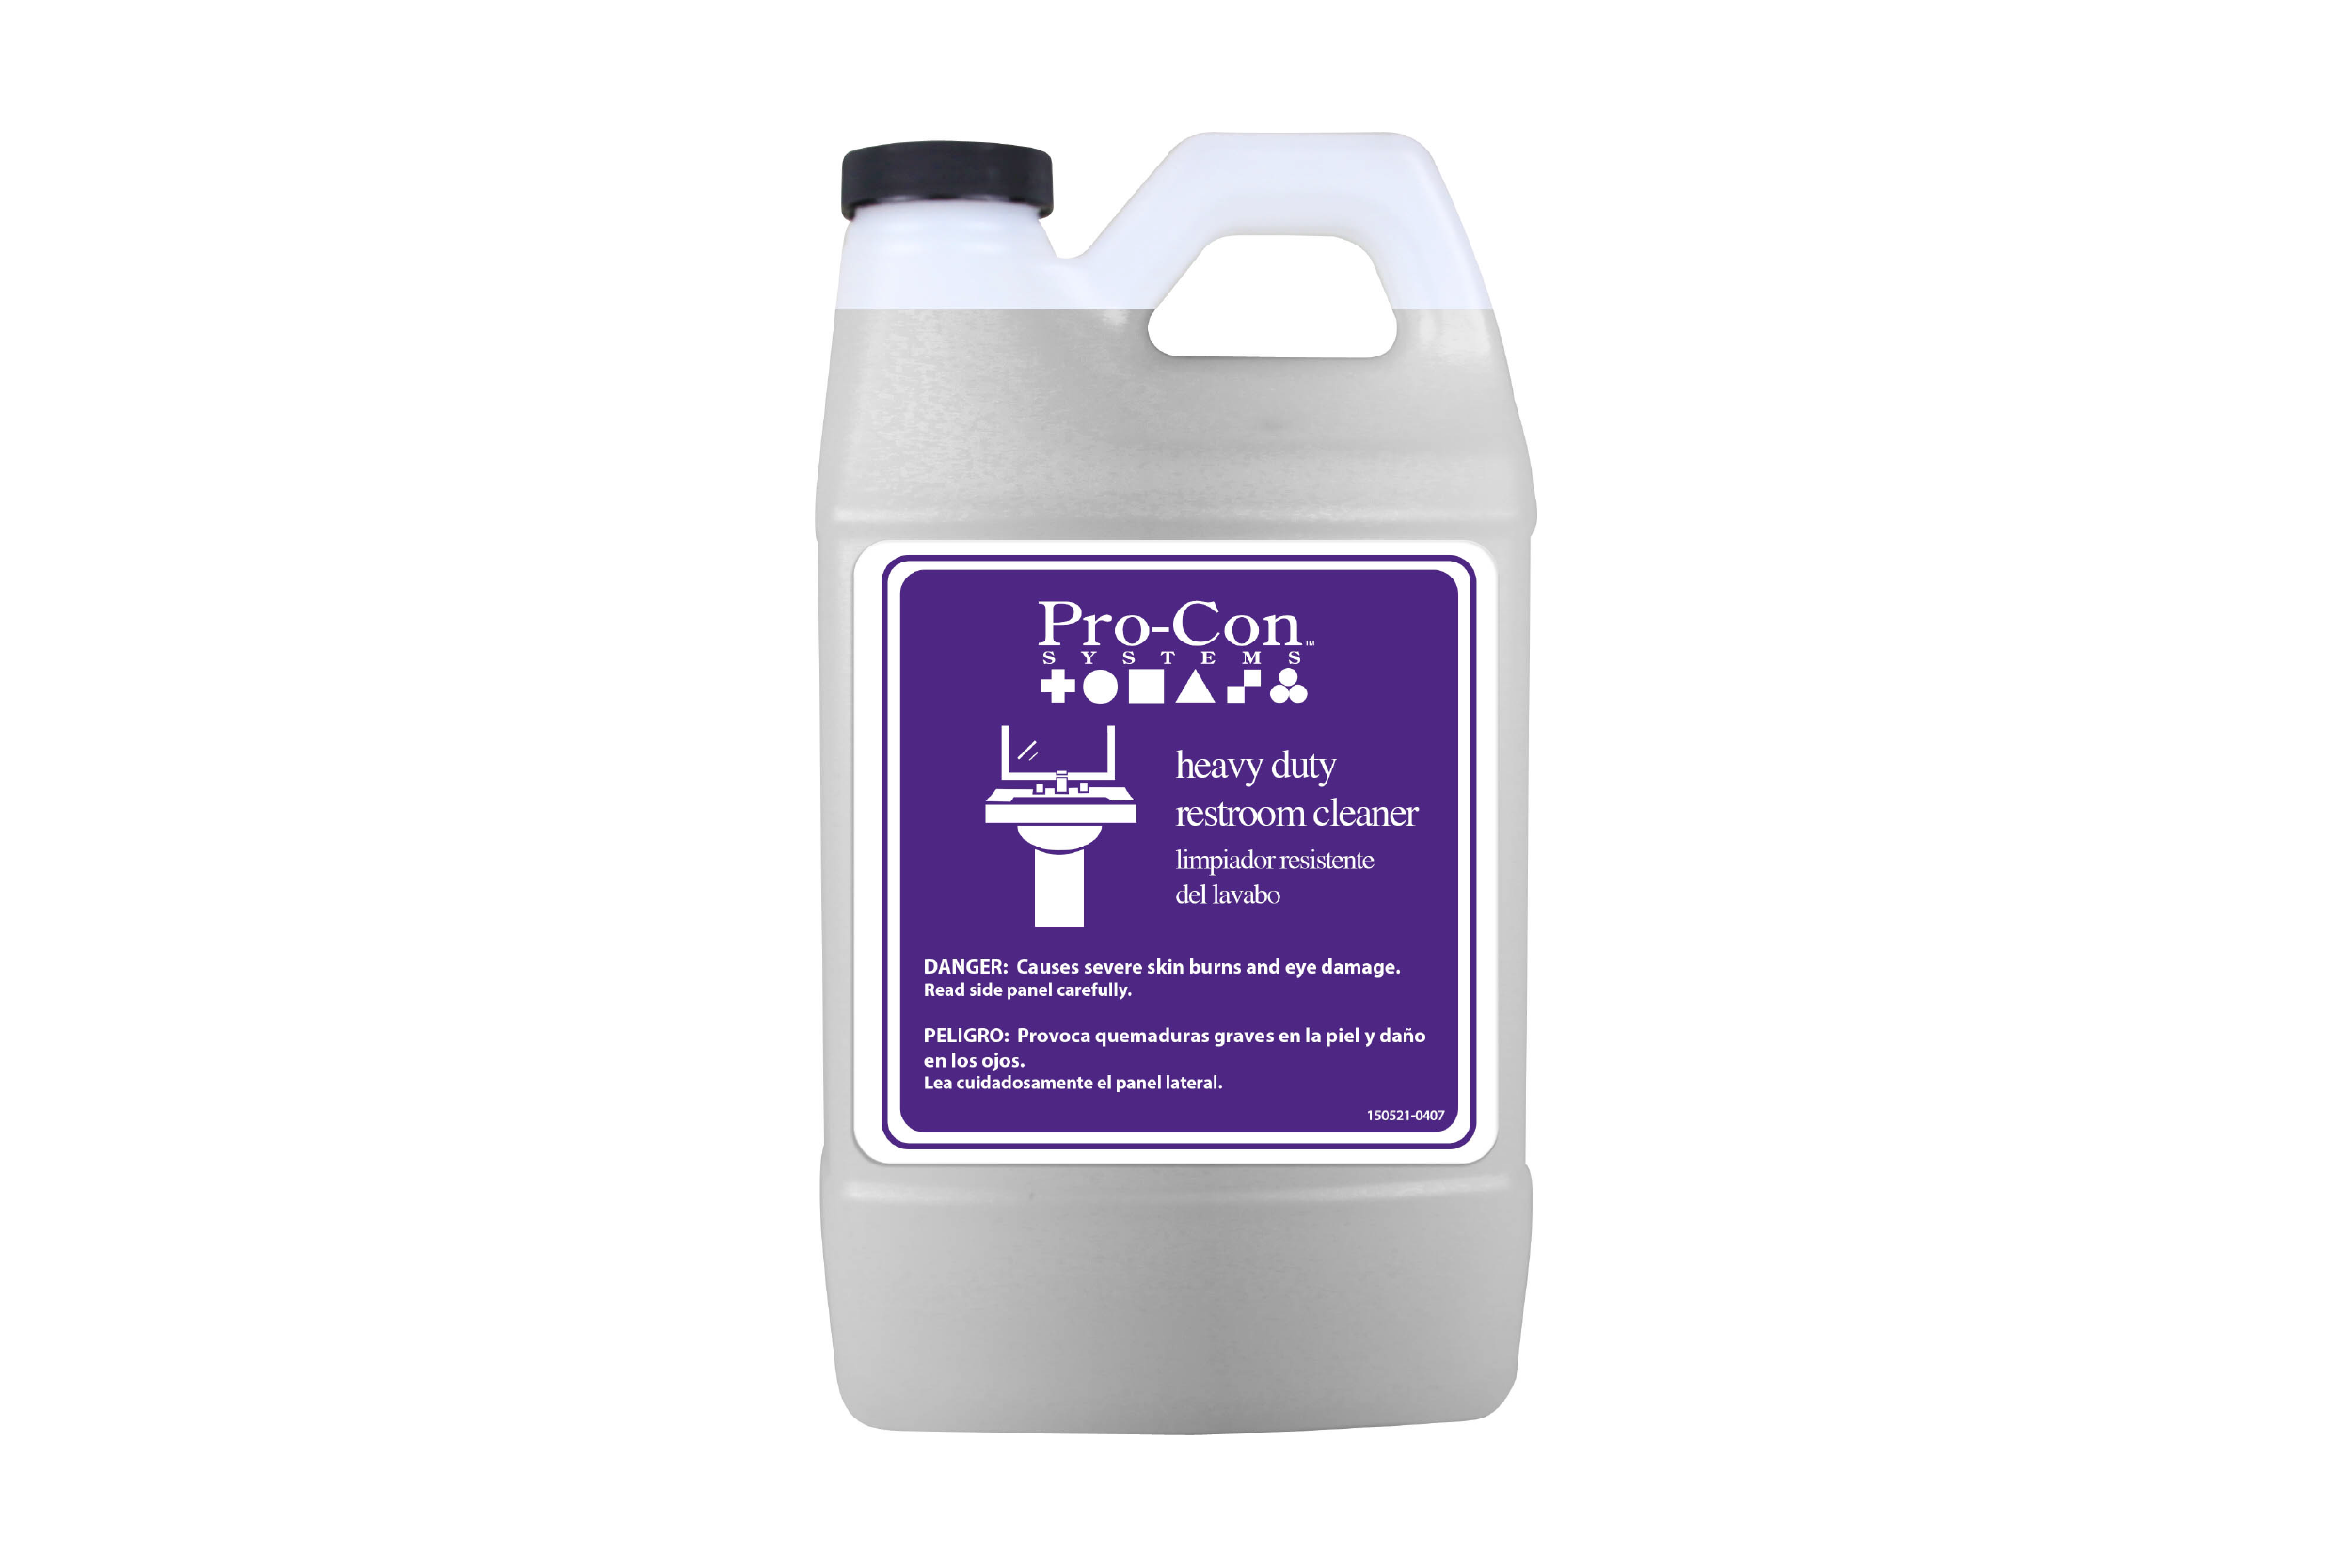 https://dynomfg.com/wp-content/uploads/2022/04/Pro-Con-HD-Bathroom-Cleaner.png